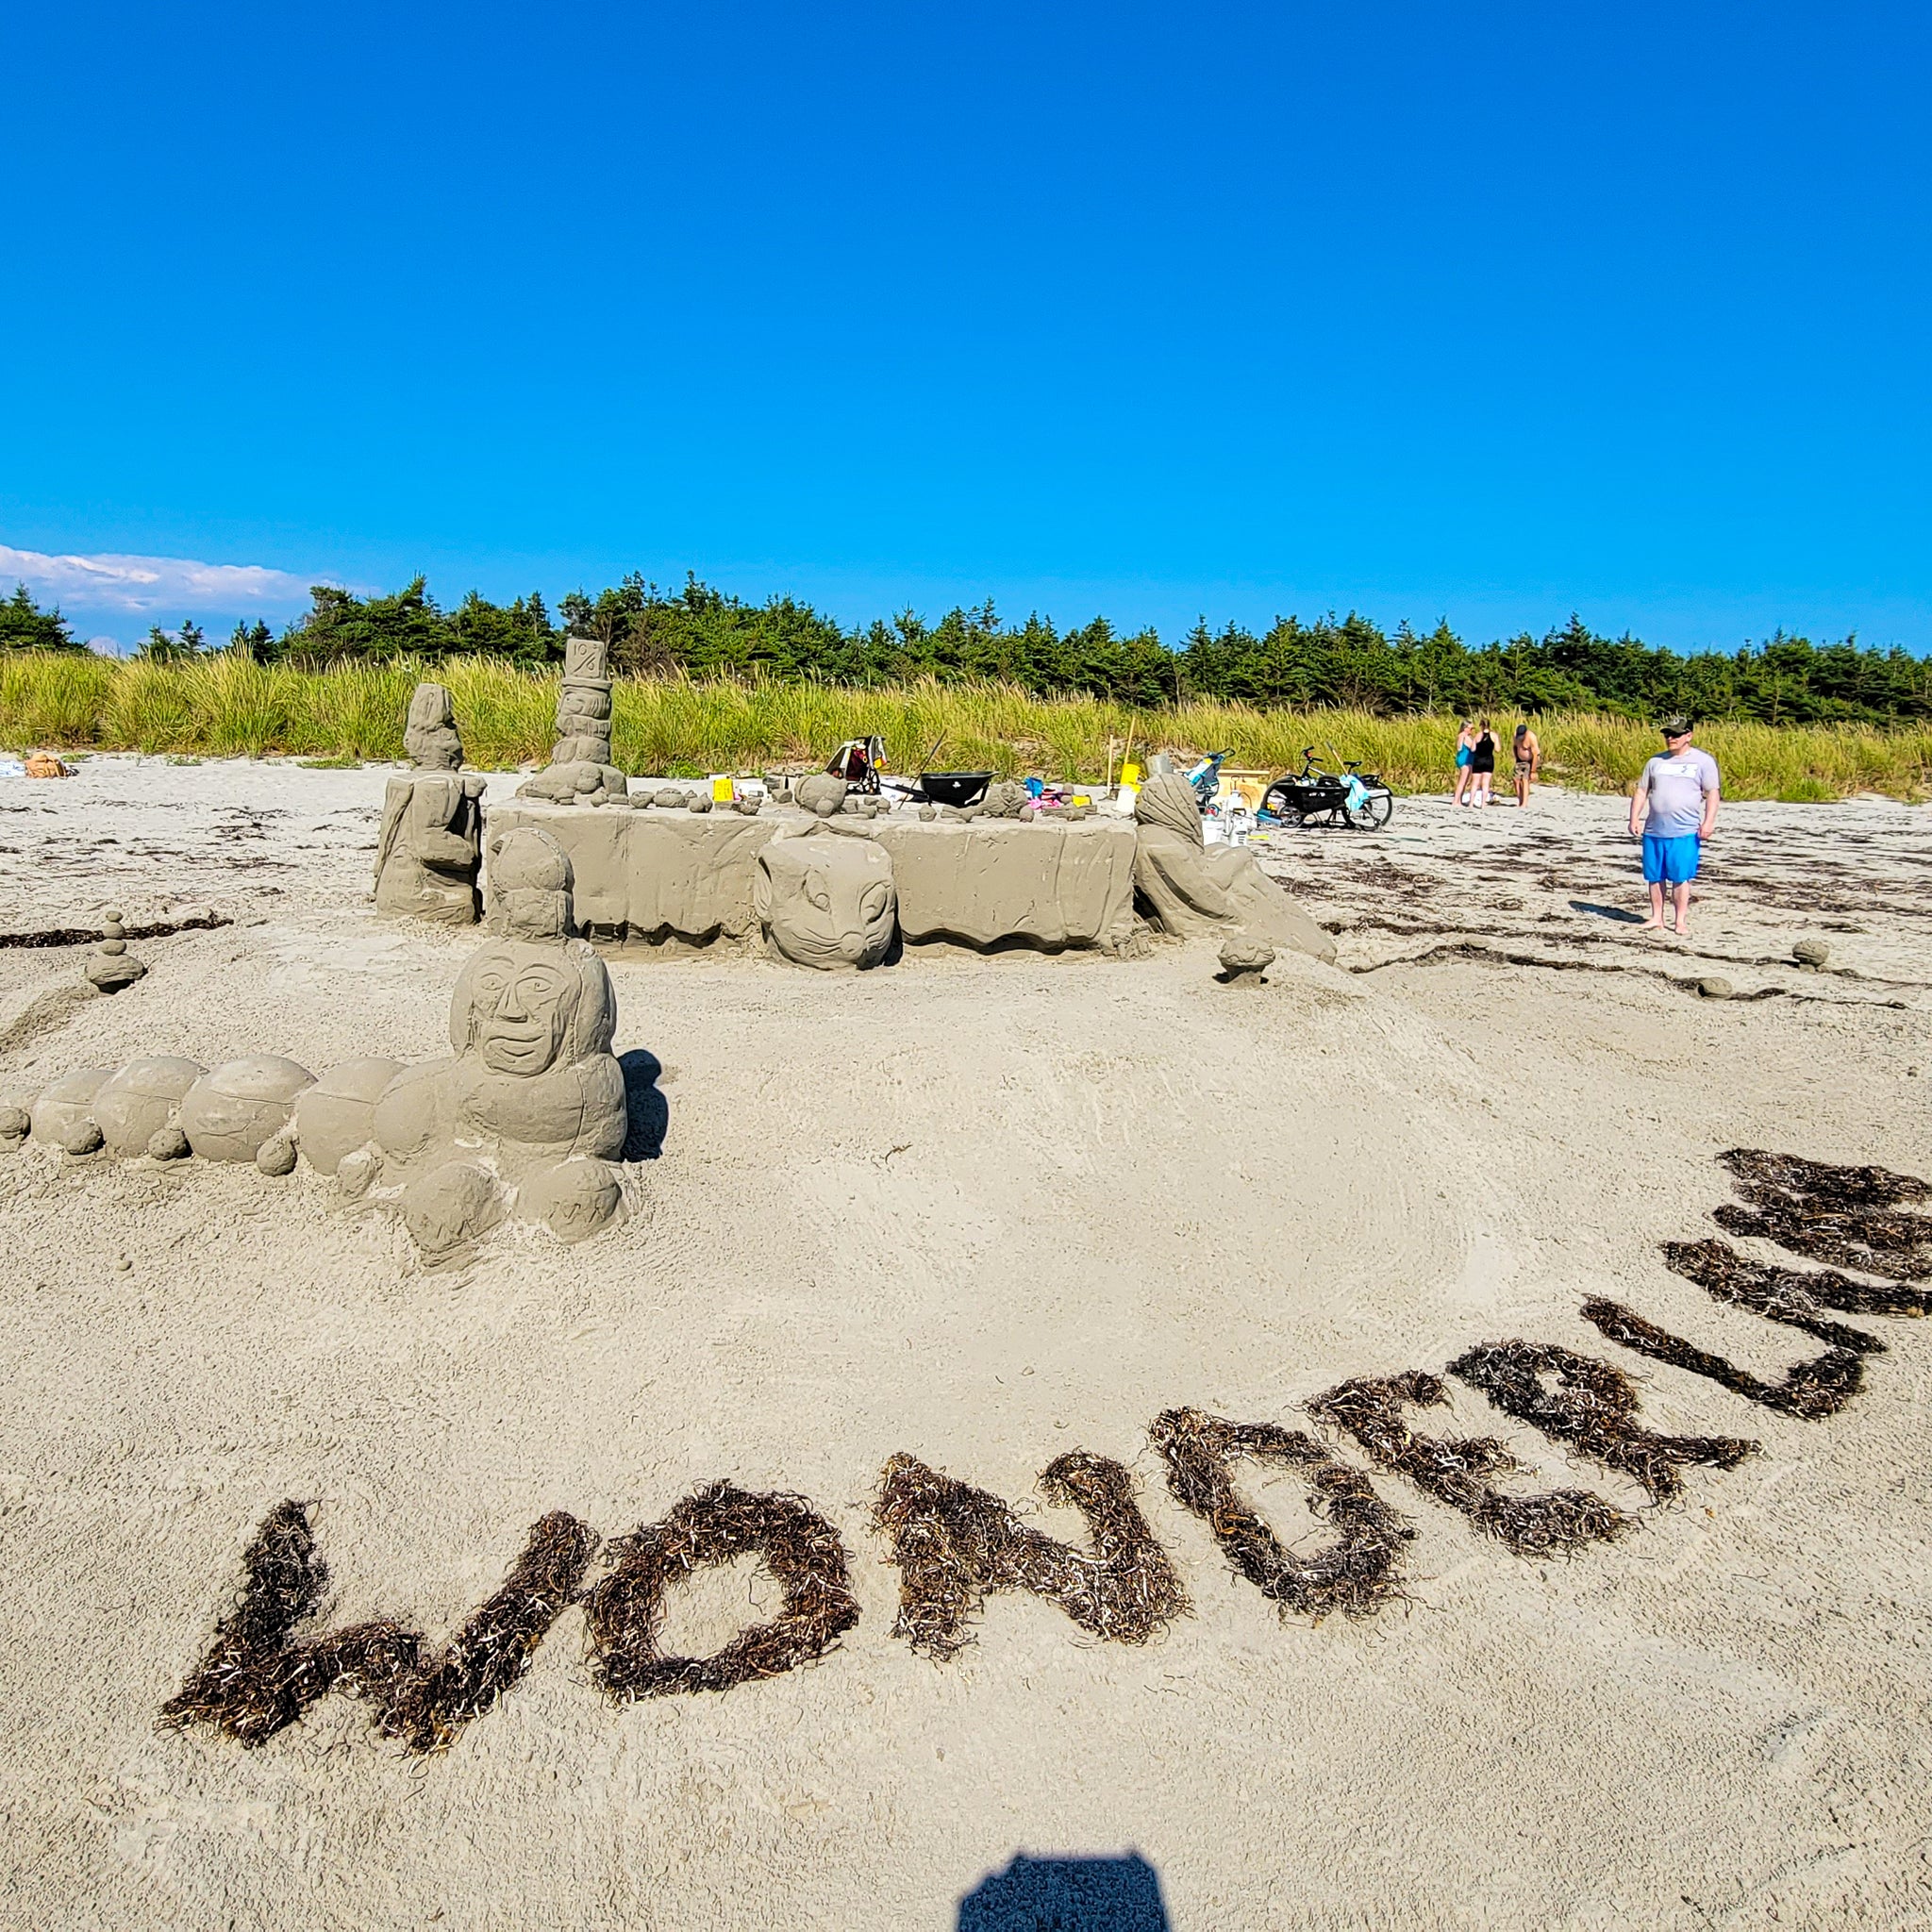 An Alice in Wonderland sandcastle with all the characters! #beachlife #sandcastle #sandy